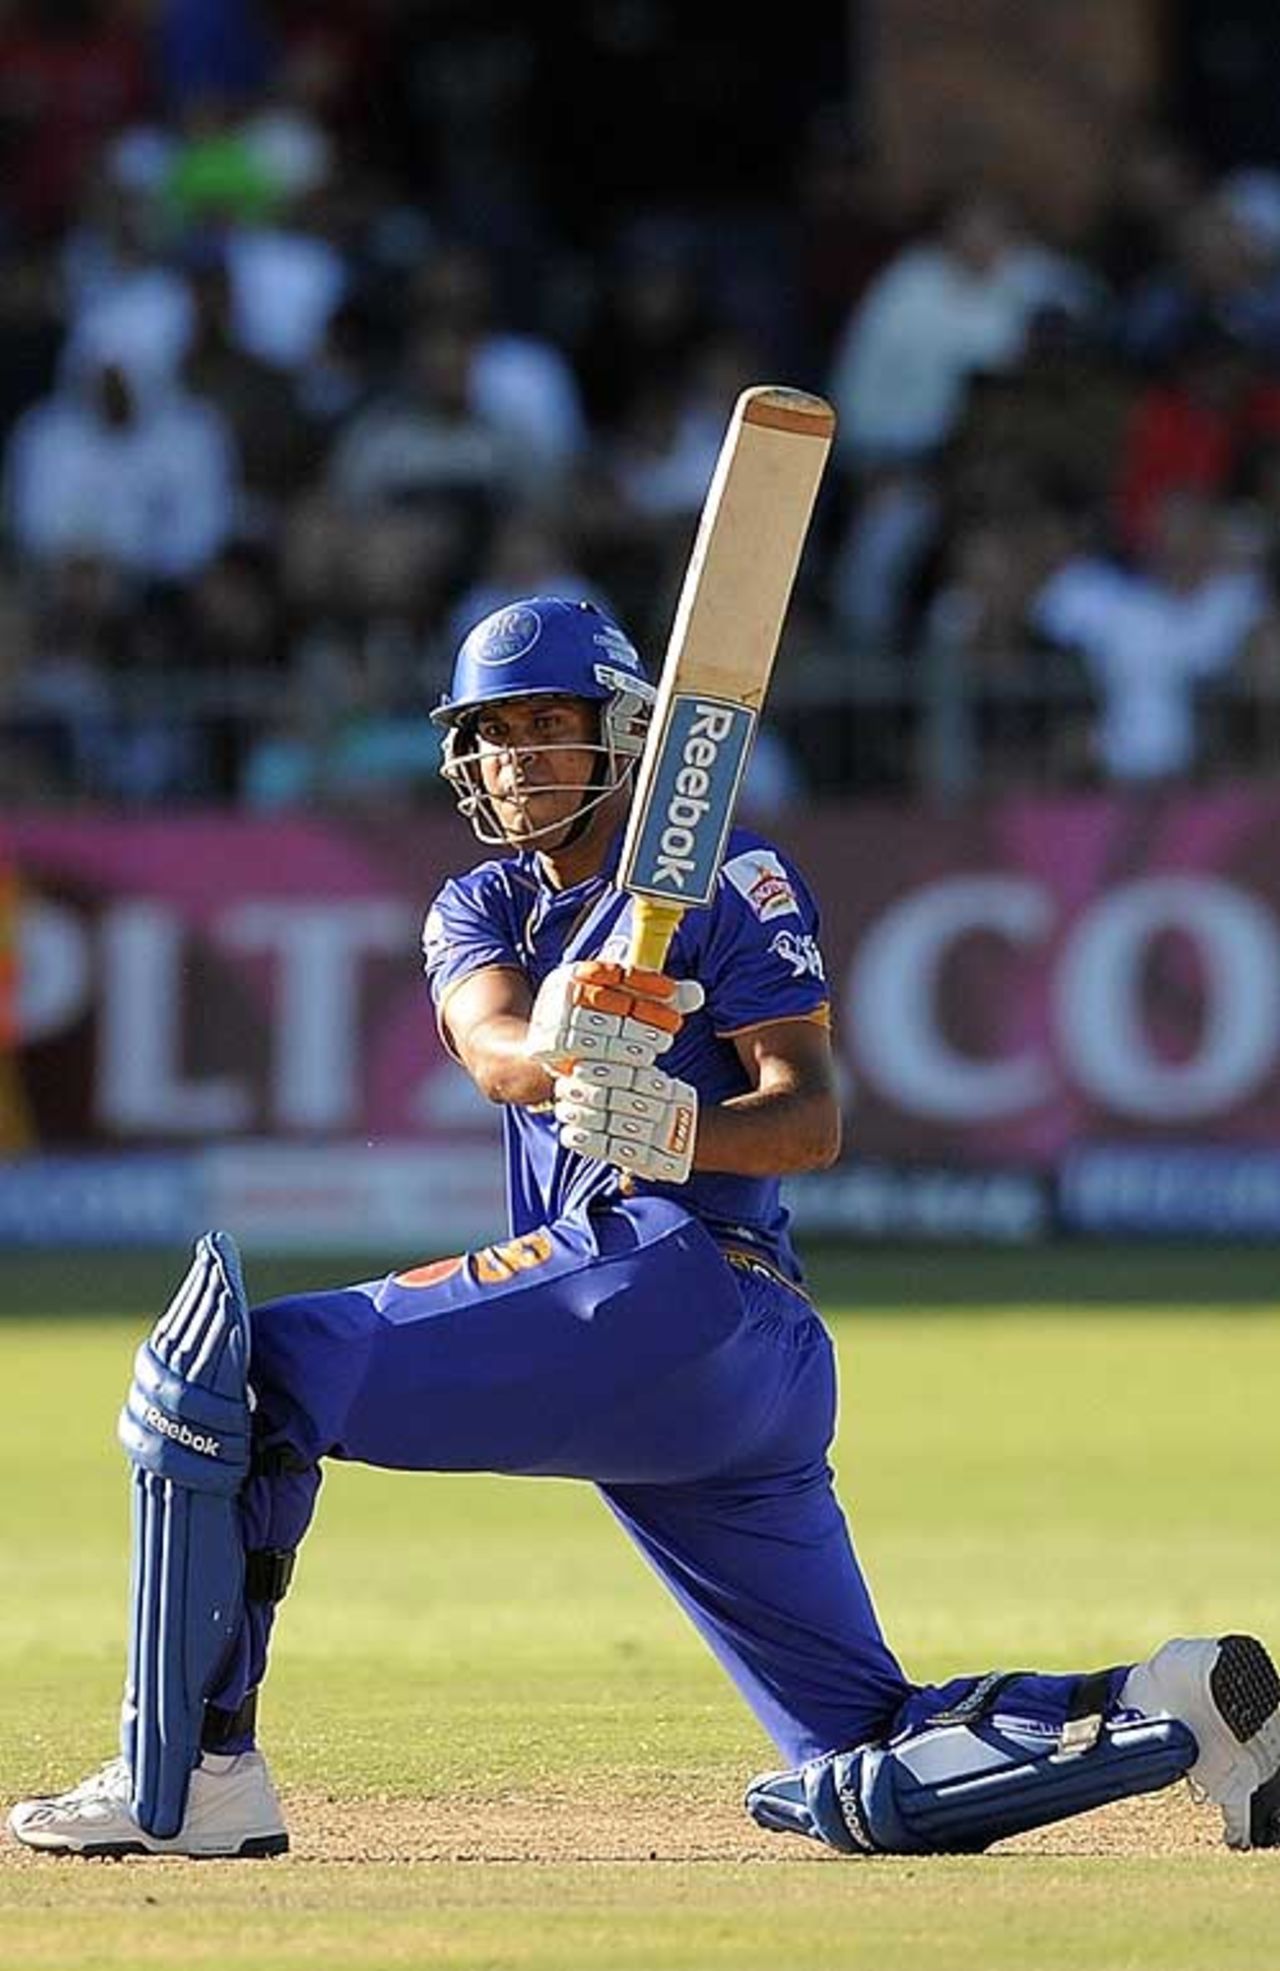 Yusuf Pathan swings during his important cameo, Deccan Chargers v Rajasthan Royals, IPL, 25th match, Port Elizabeth, May 2, 2009